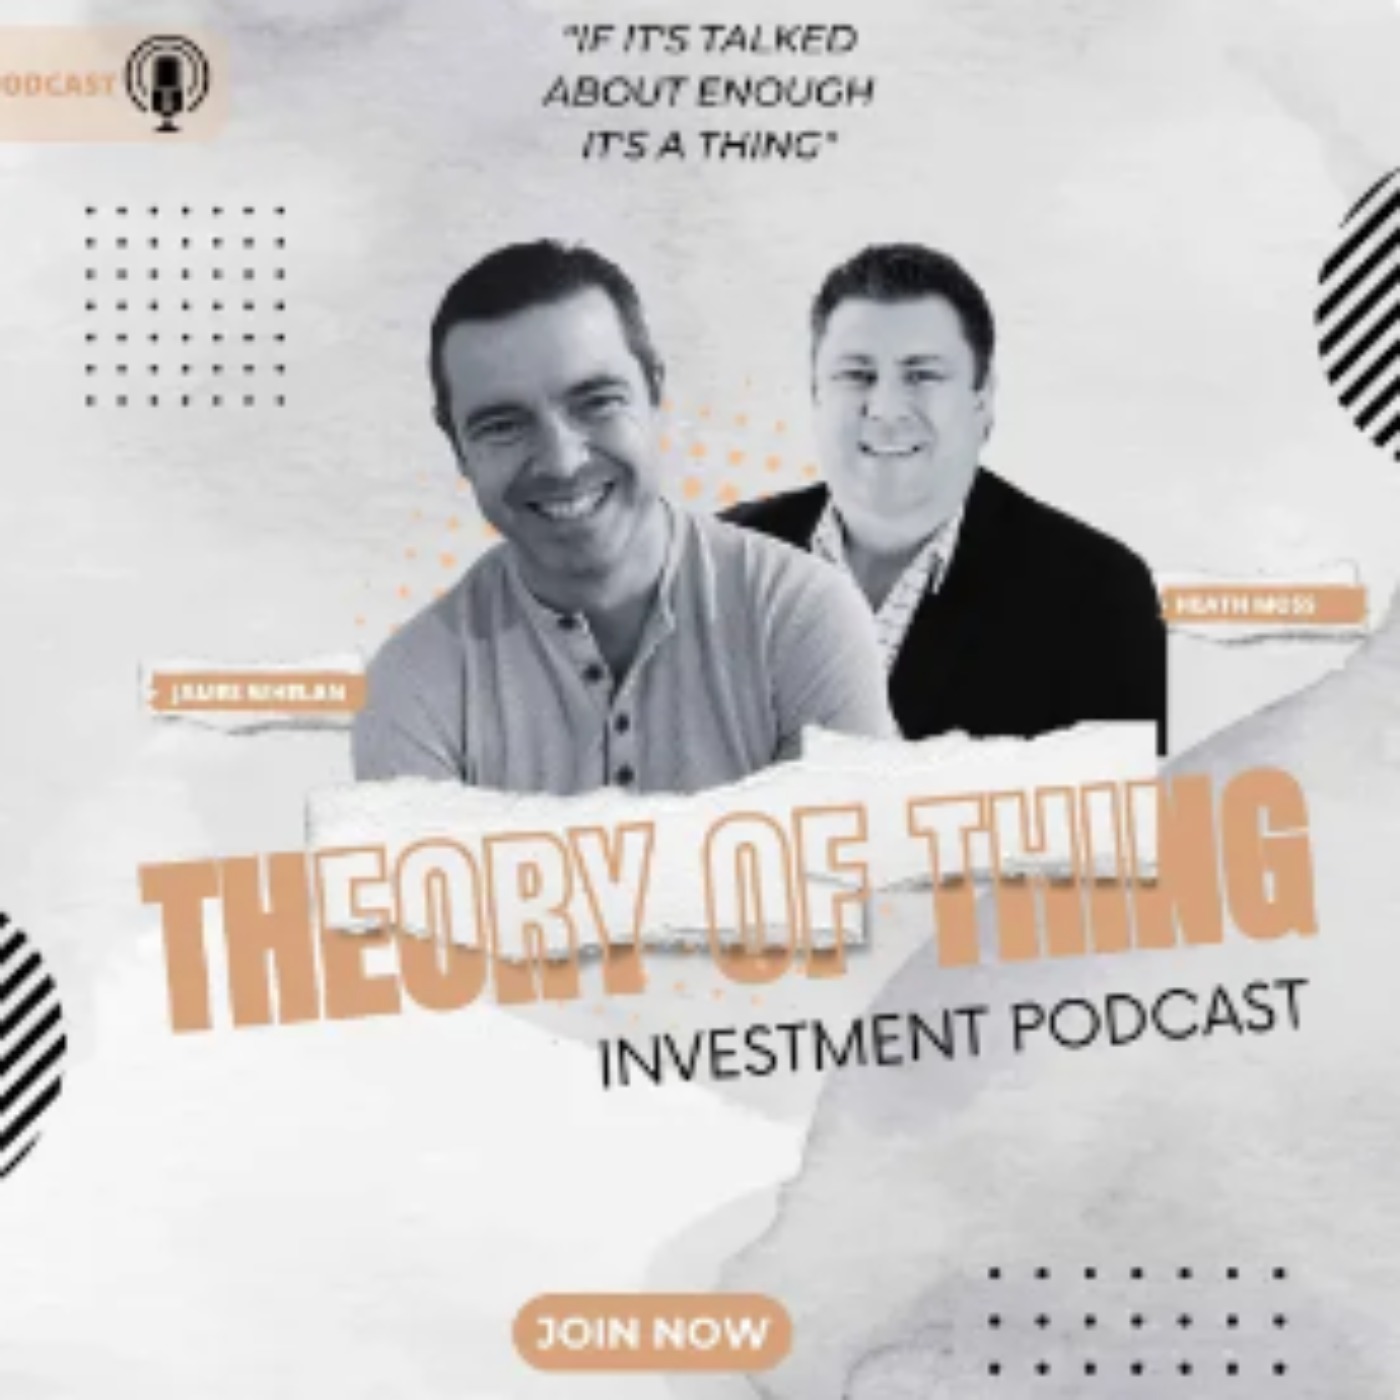 Episode 33 of ”The Theory of Thing Investment Podcast”!